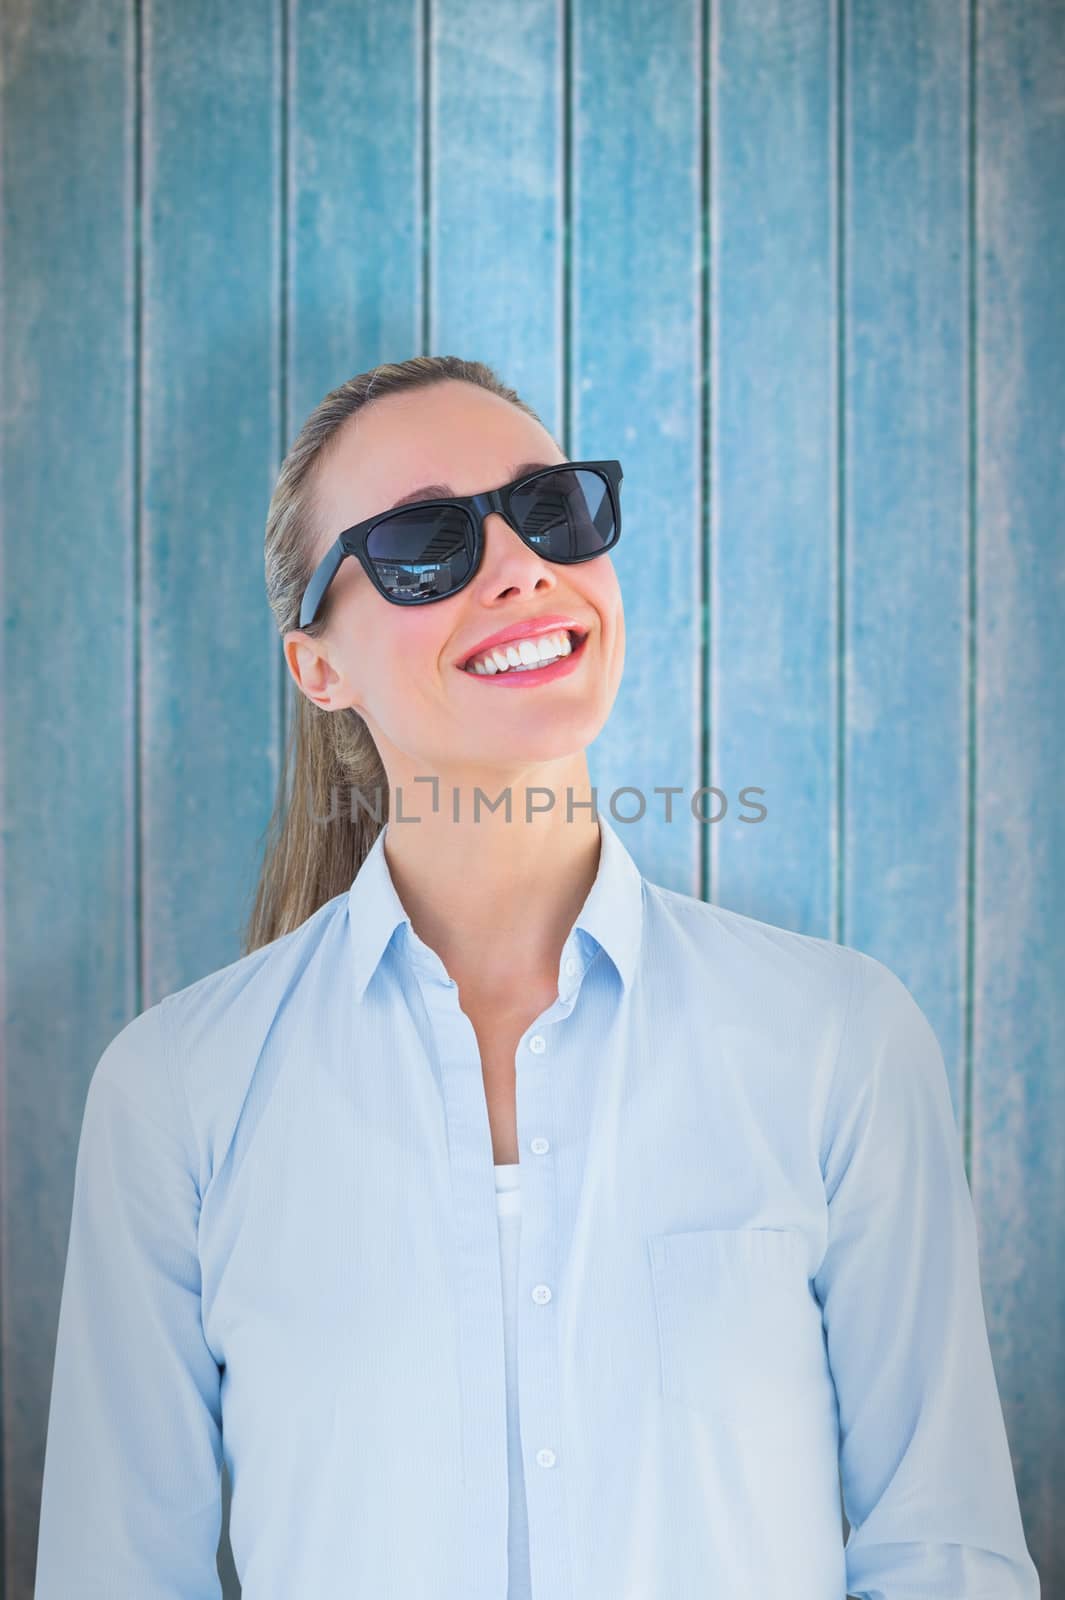 Portrait of smiling blonde wearing sunglasses against wooden planks